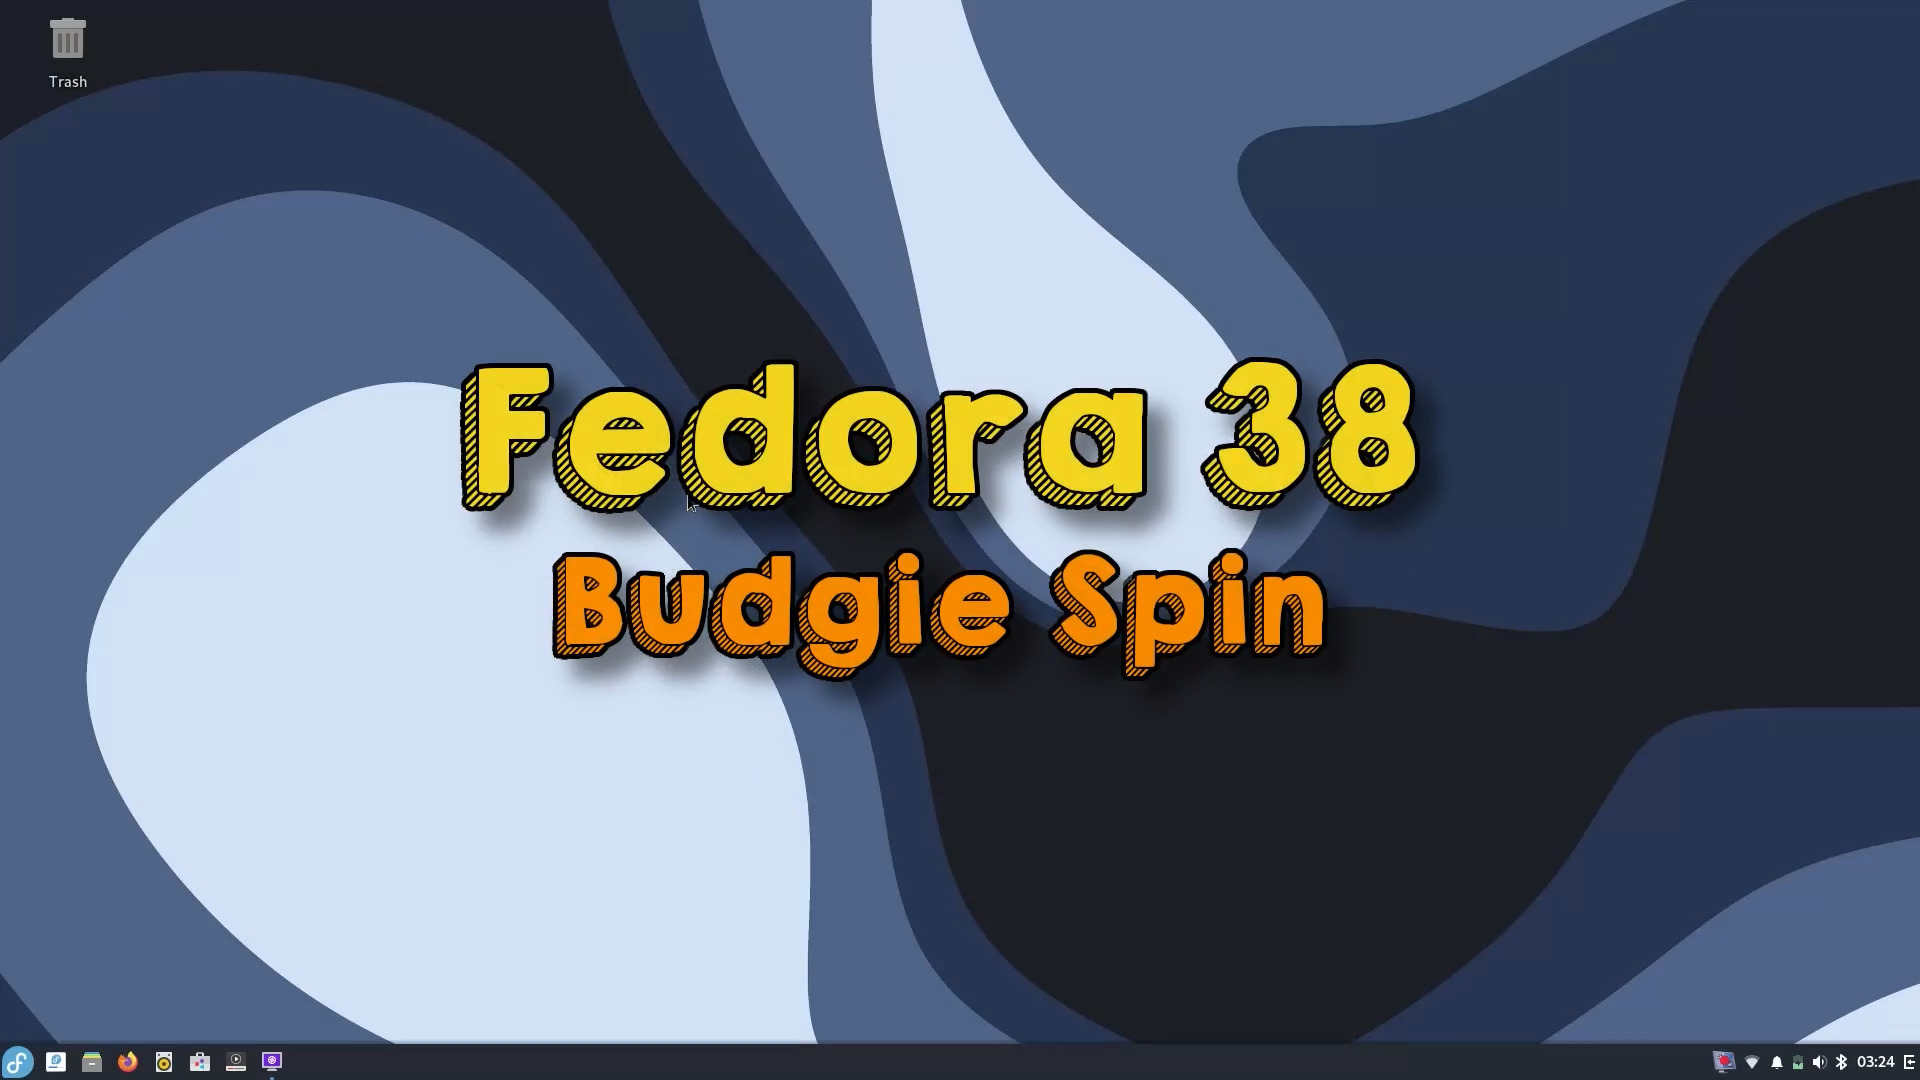 Fedora 38 Budgie Spin featured image